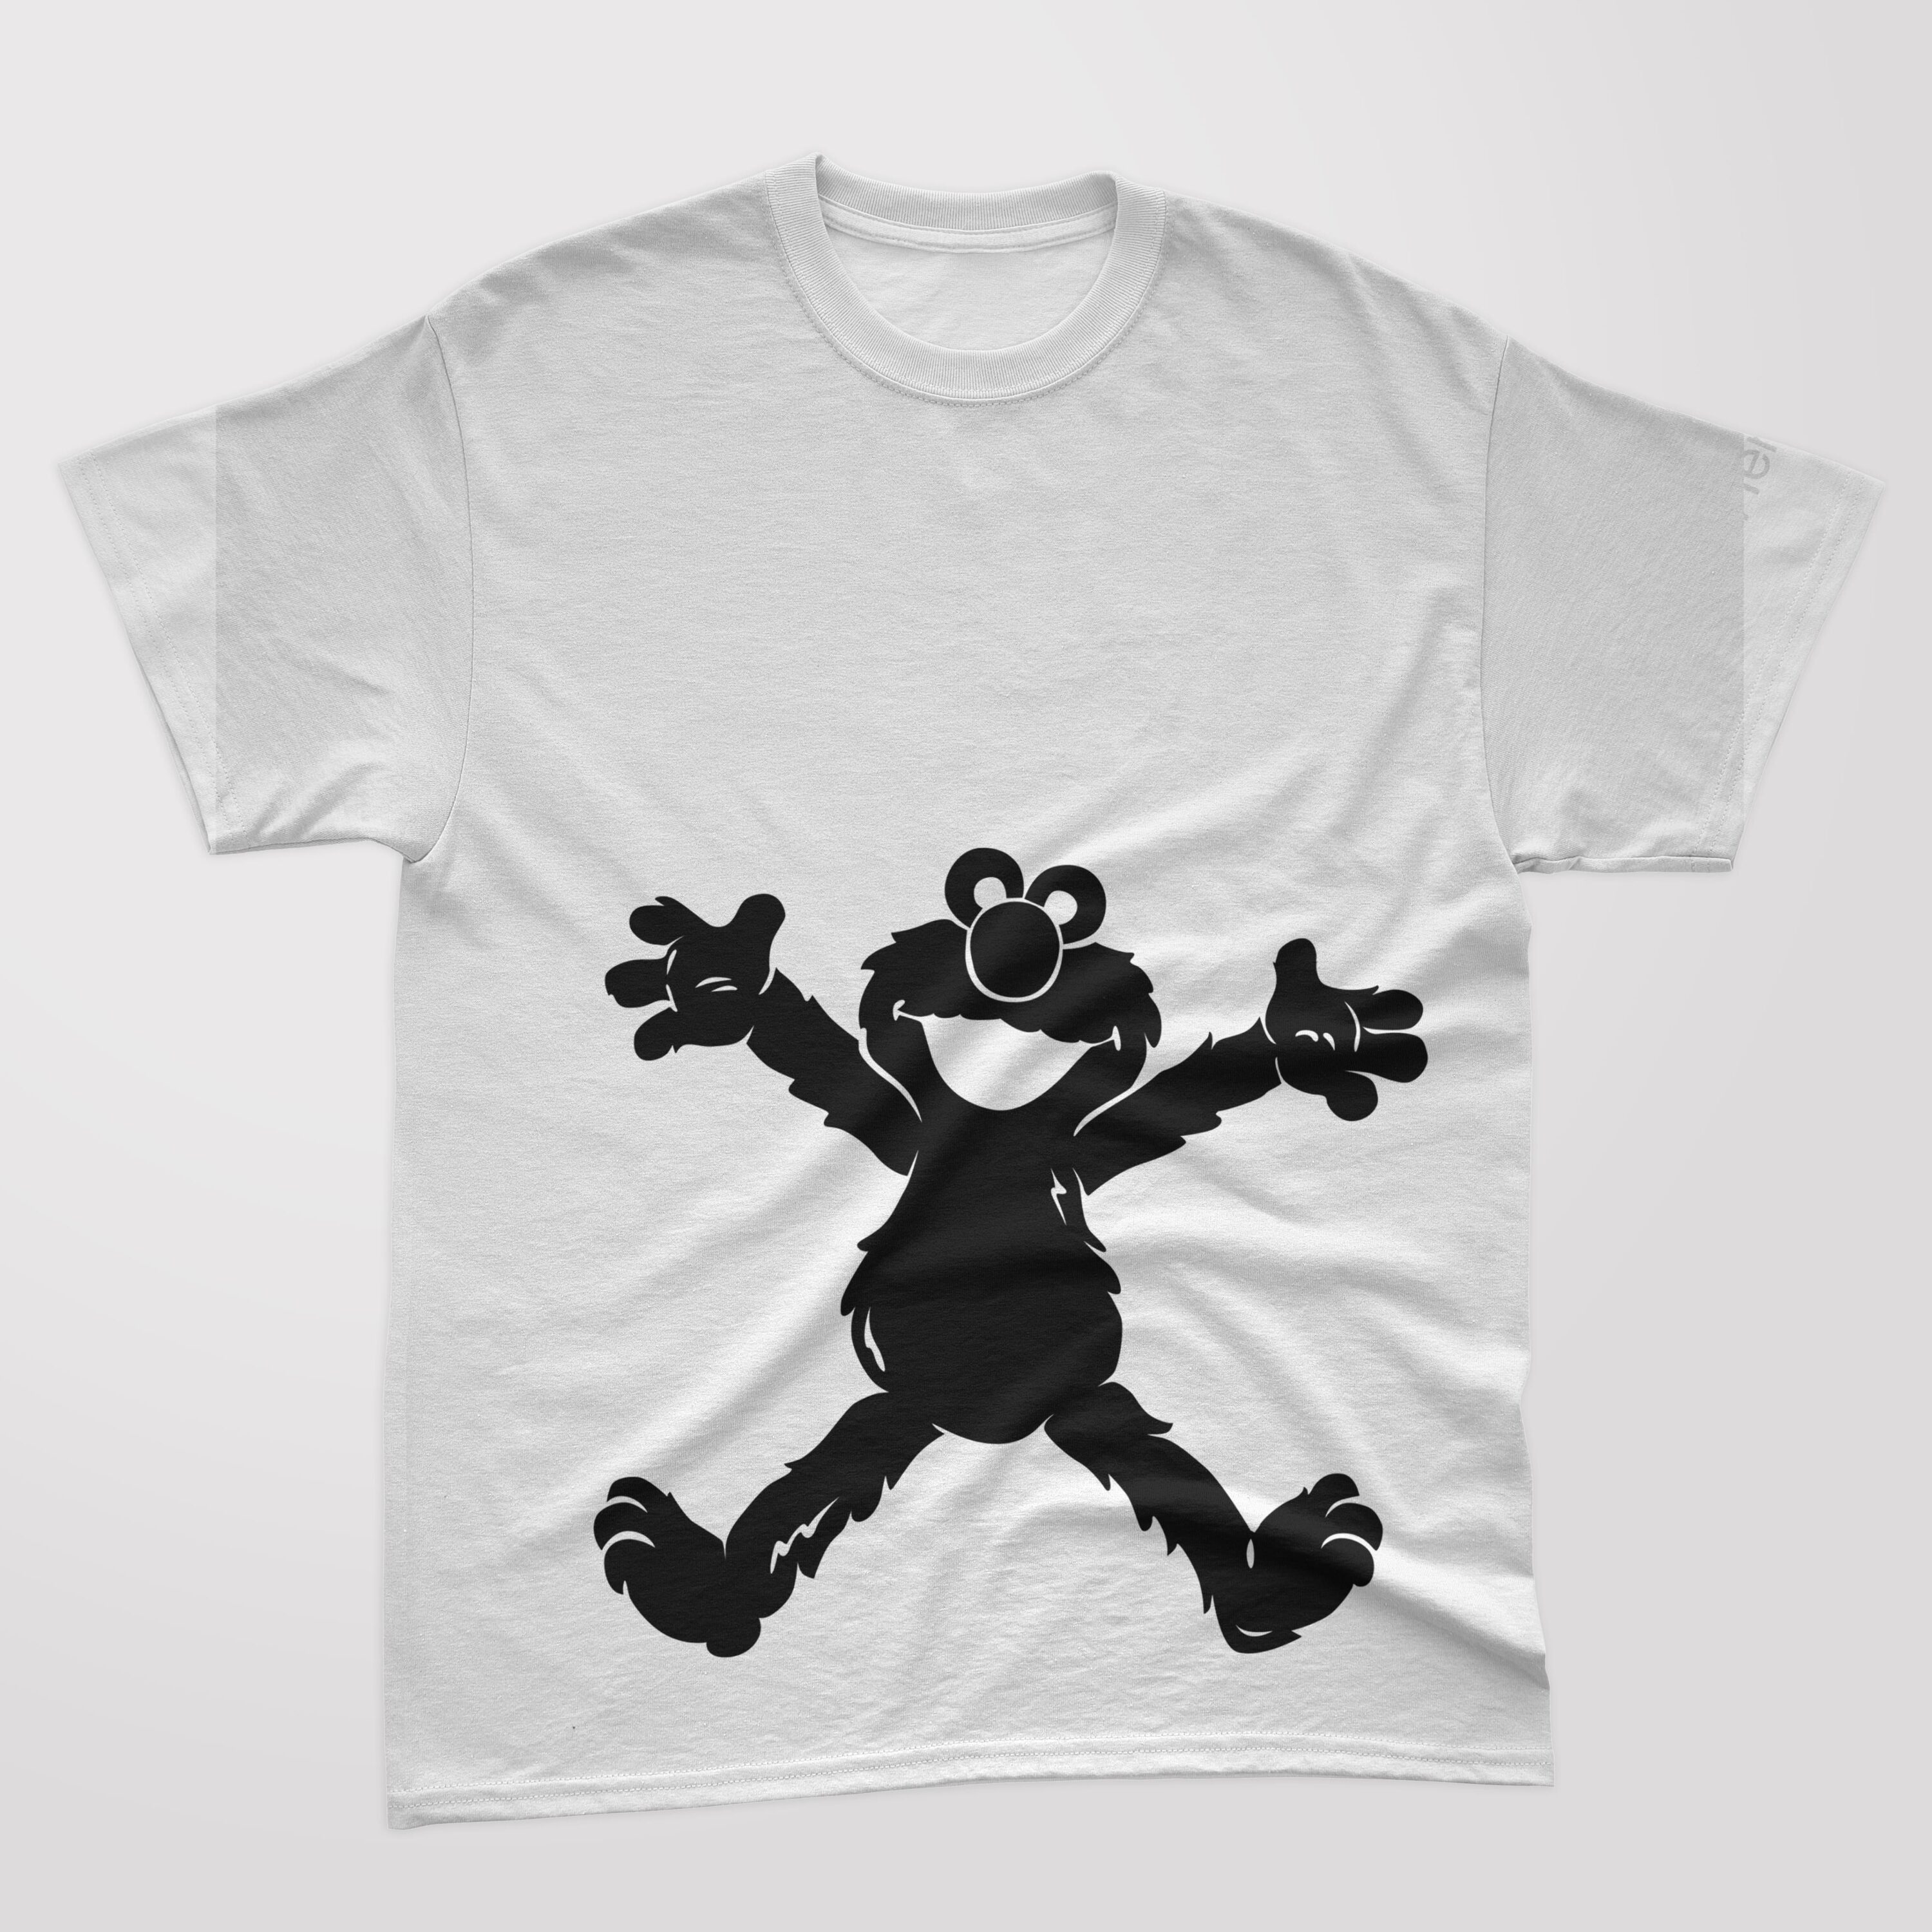 A white t-shirt with a black silhouette funny baby cookie monster.